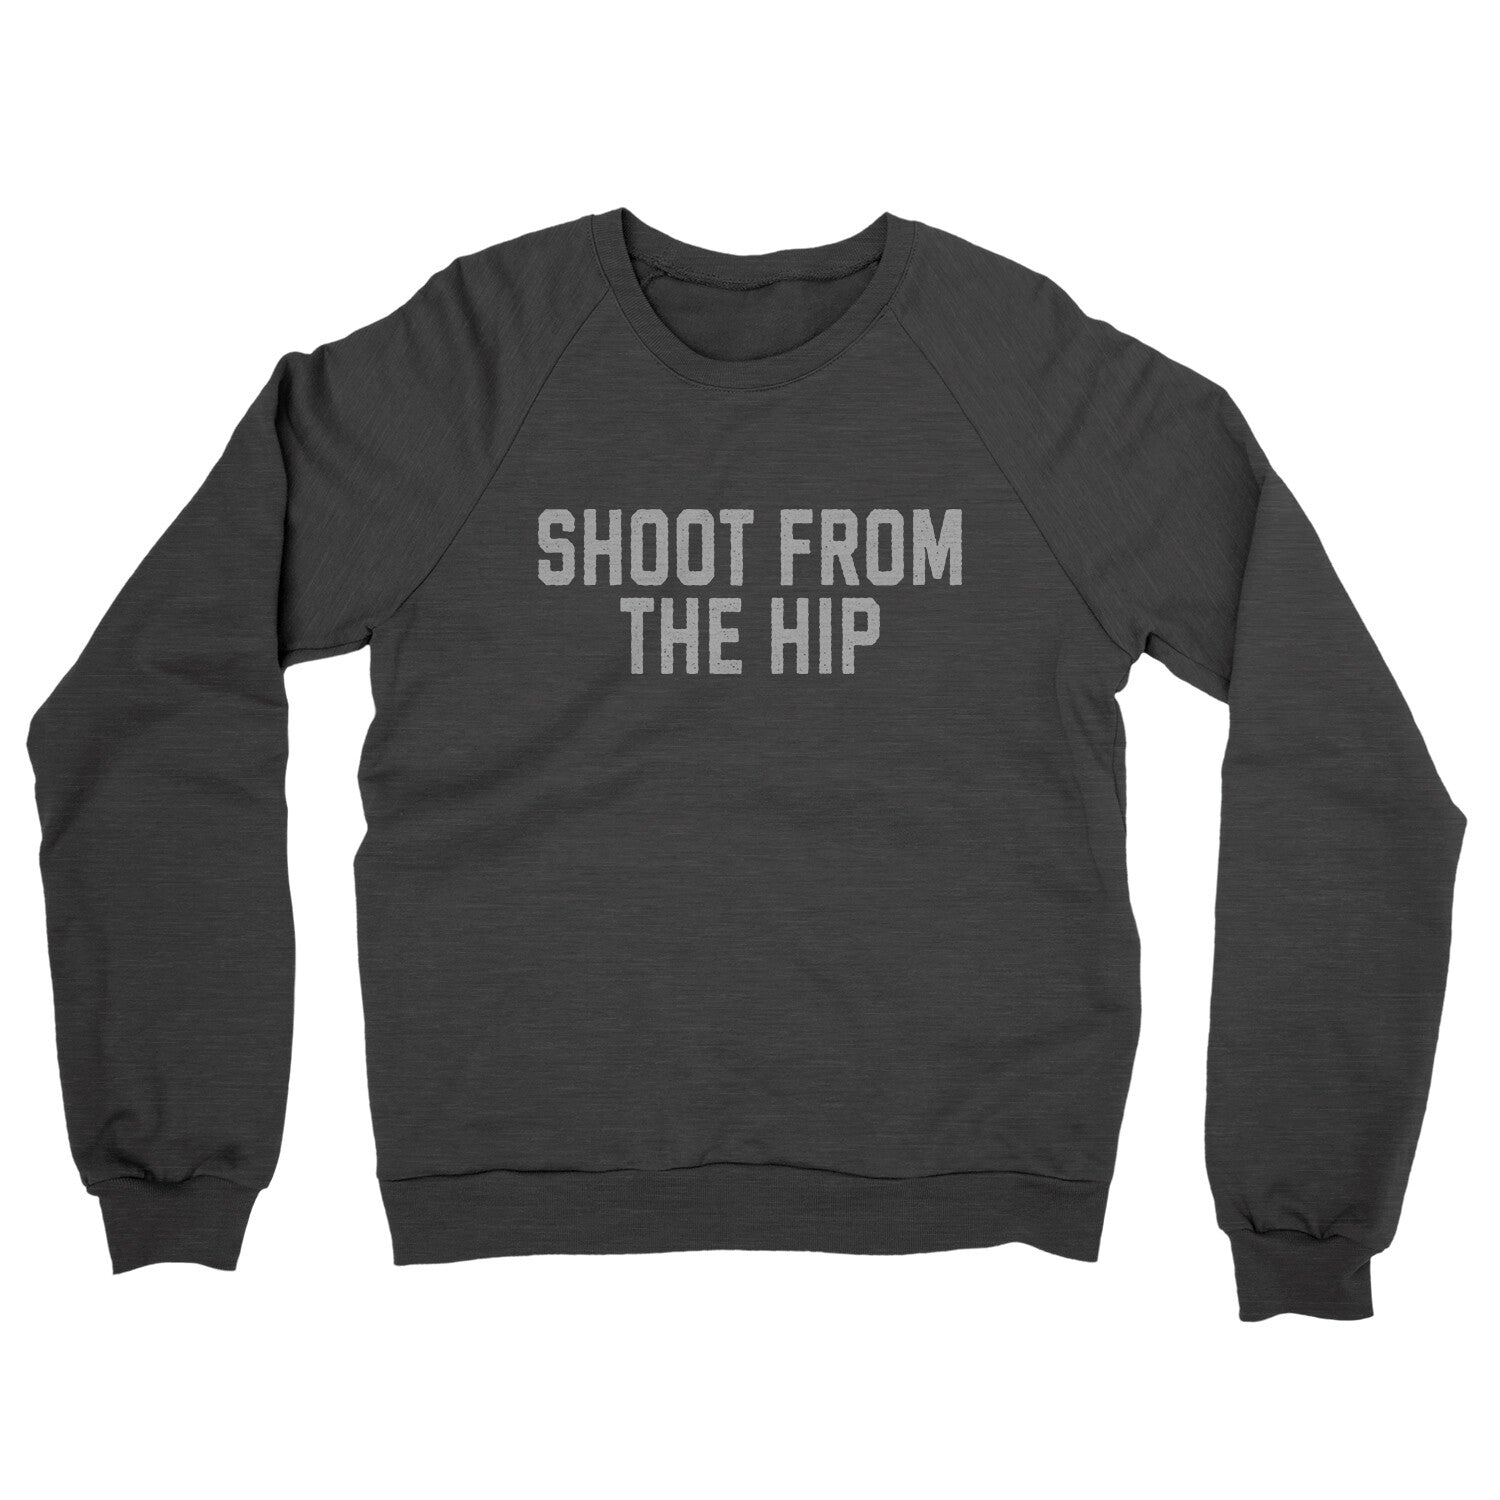 Shoot from the Hip in Charcoal Heather Color